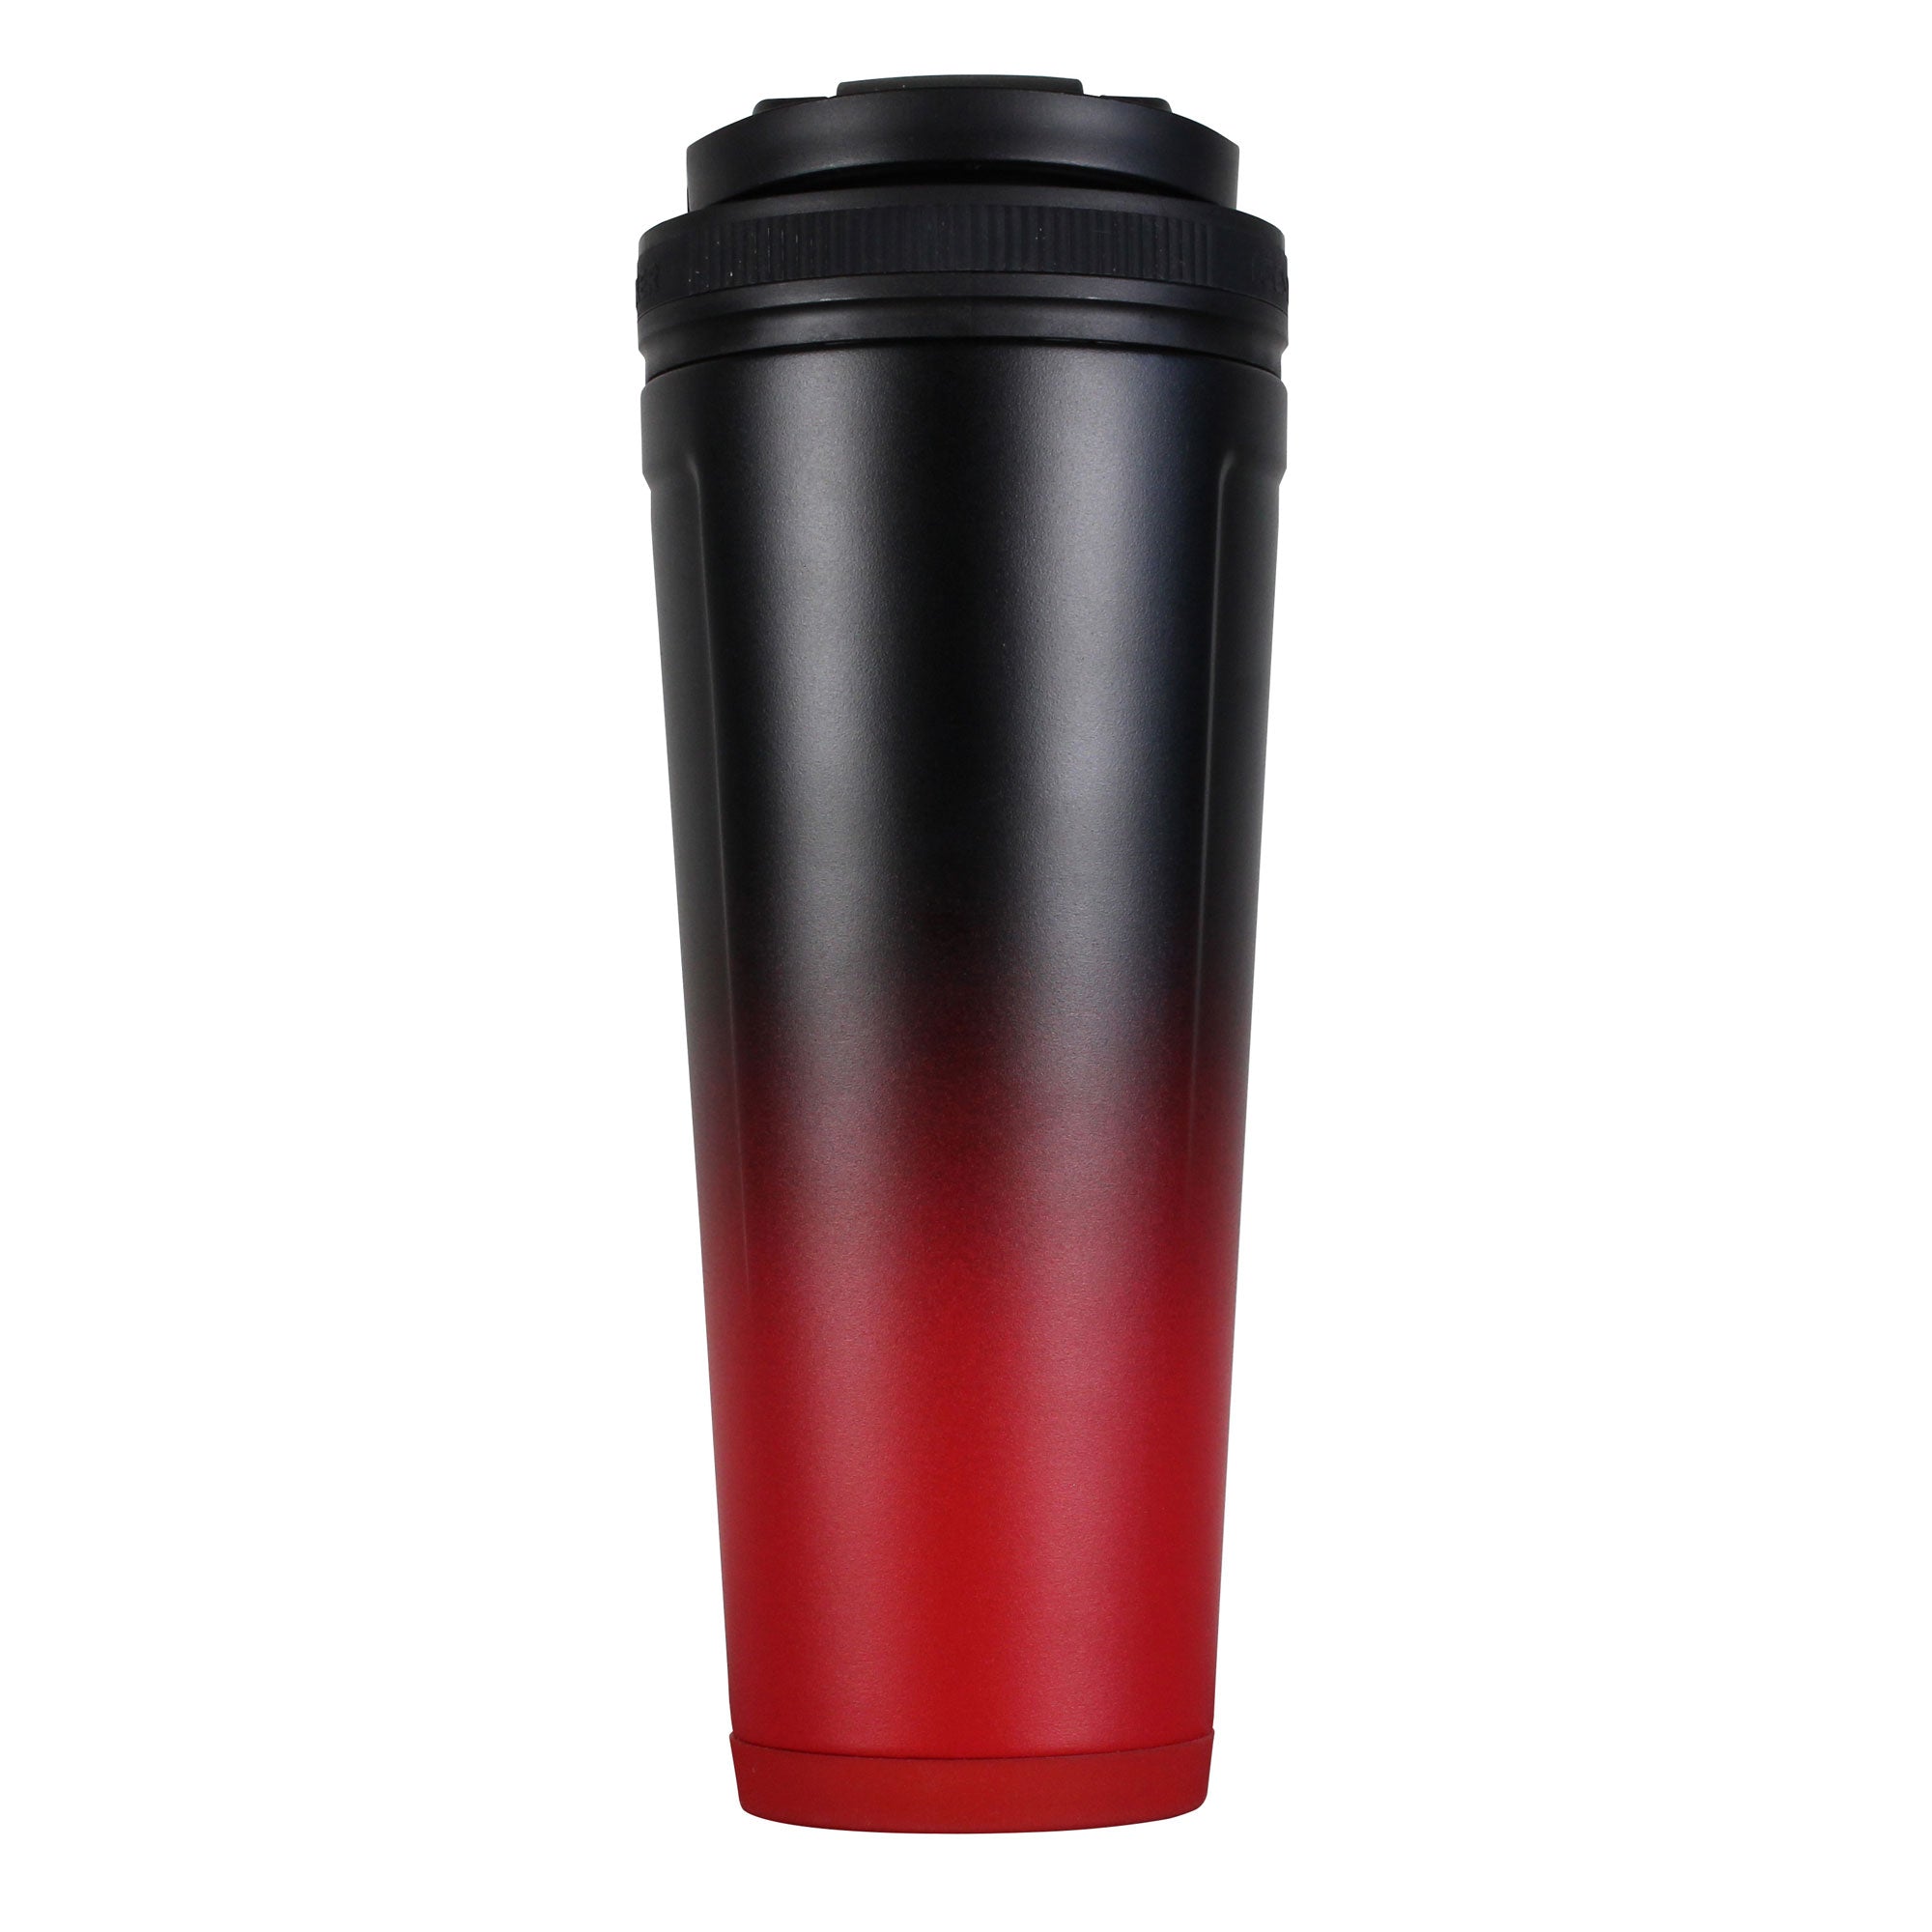 36oz Ice Shaker - Red Black Ombre